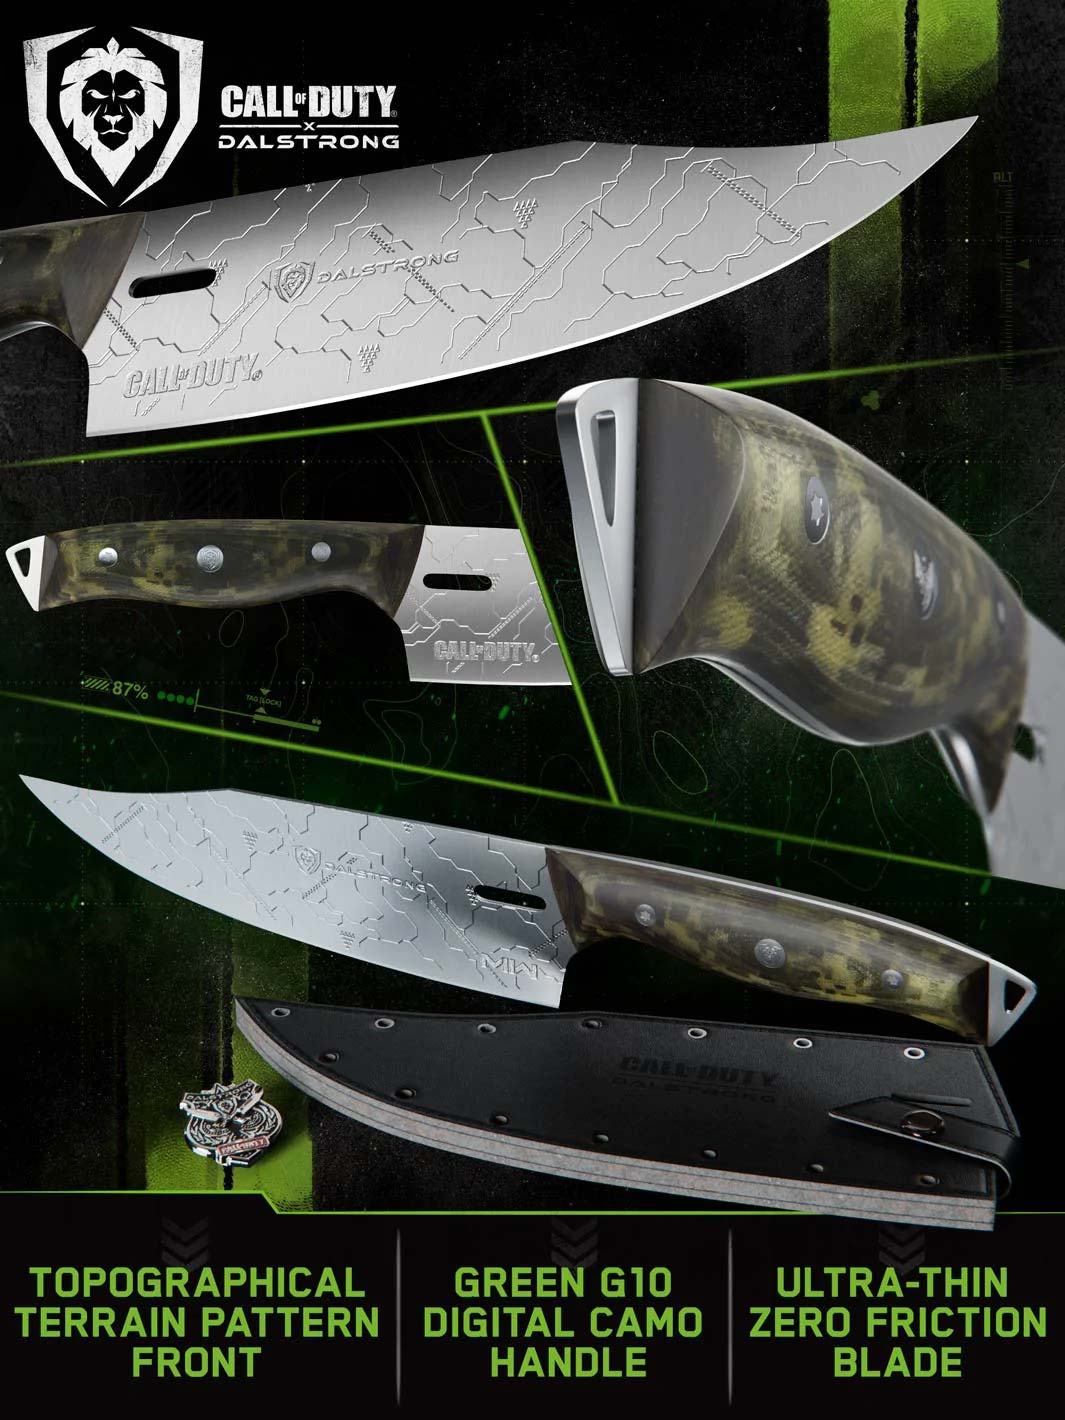 8 Chef Knife | Collectible Batman Edition | Dalstrong